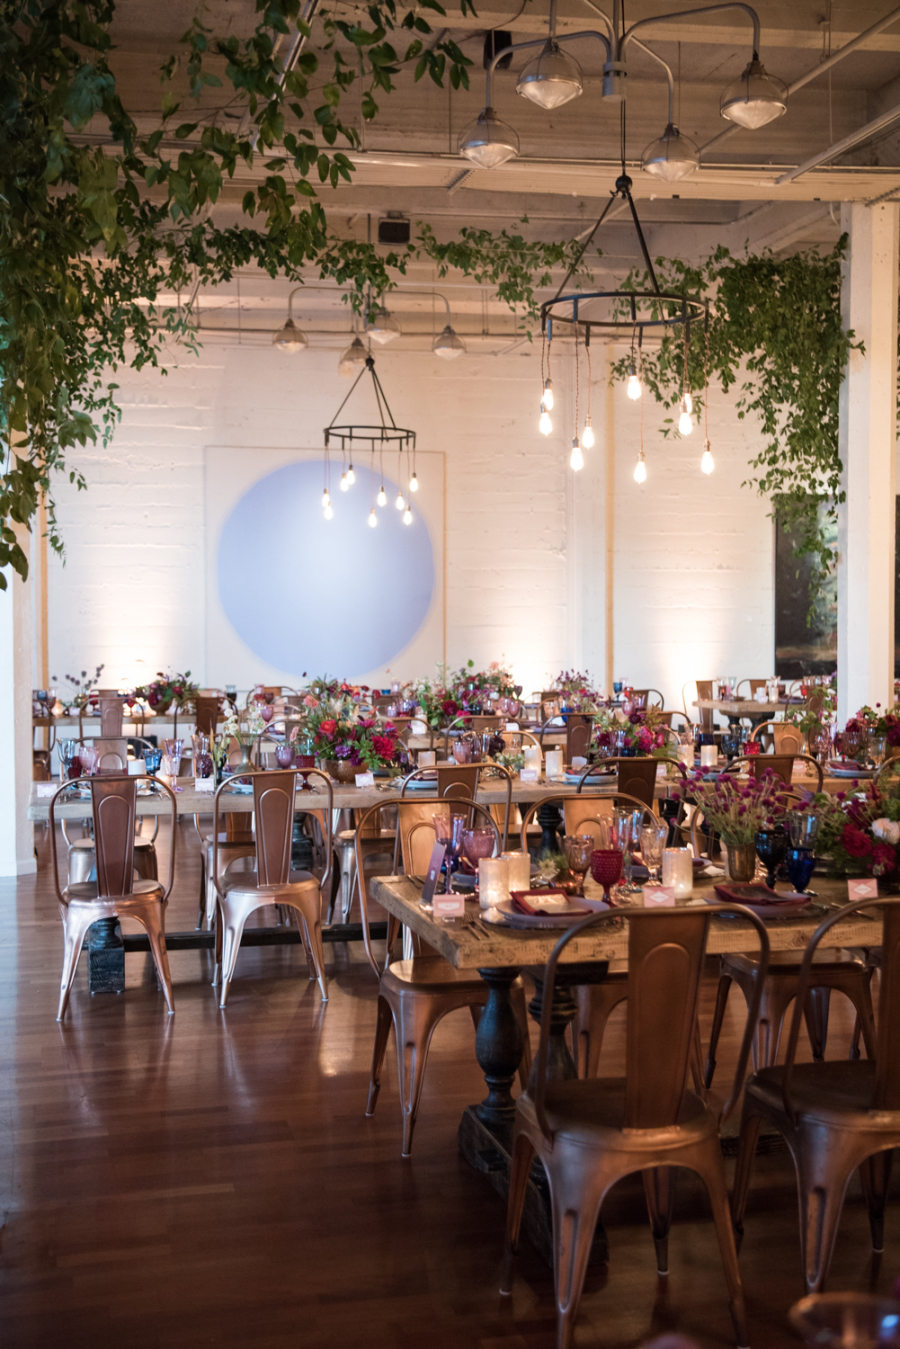 The wedding reception was done with vintage wooden tables, metal chairs, industrial chandeliers and greenery